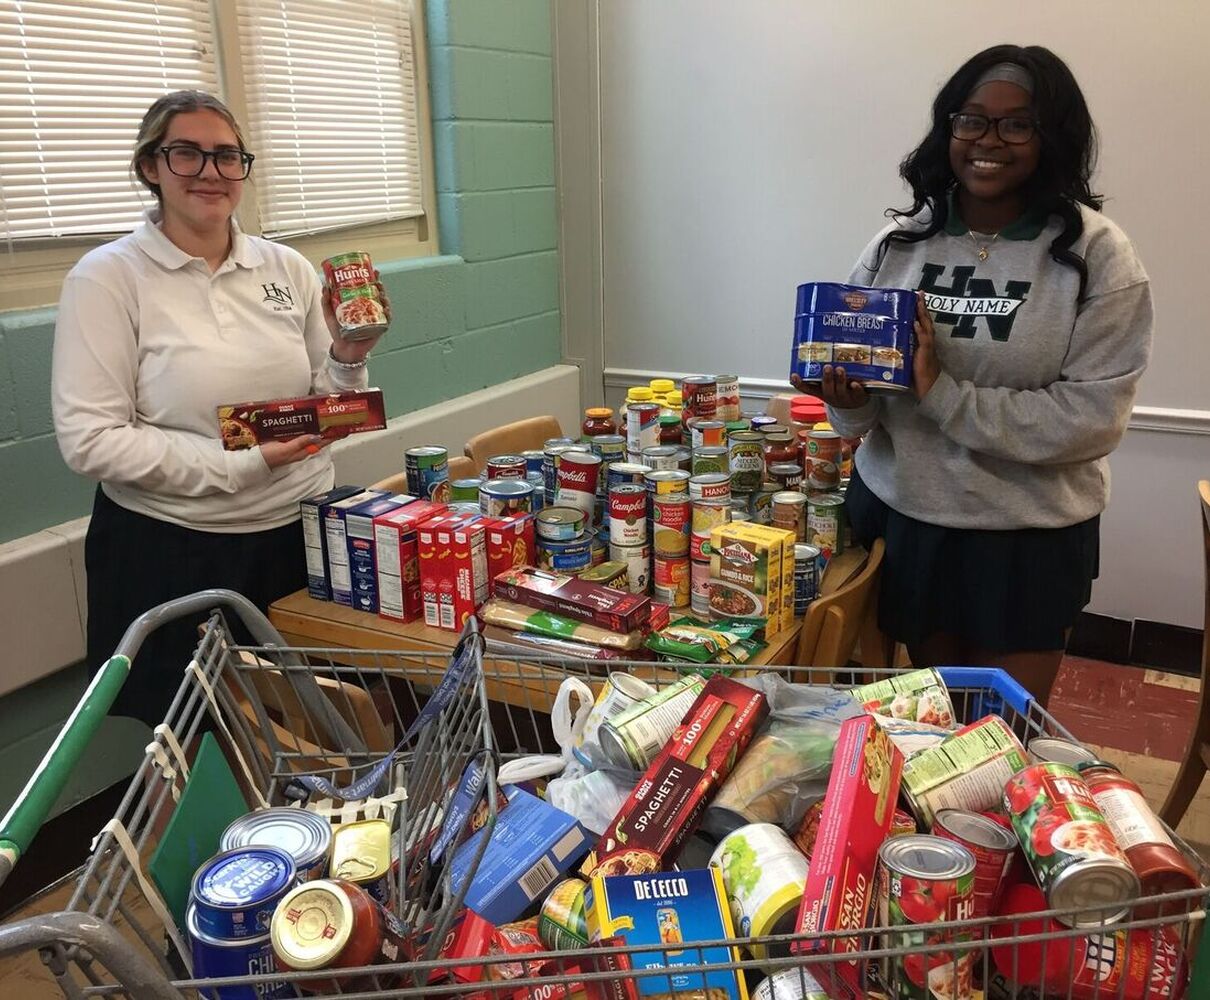 2 girls with shopping cart full for food pantry